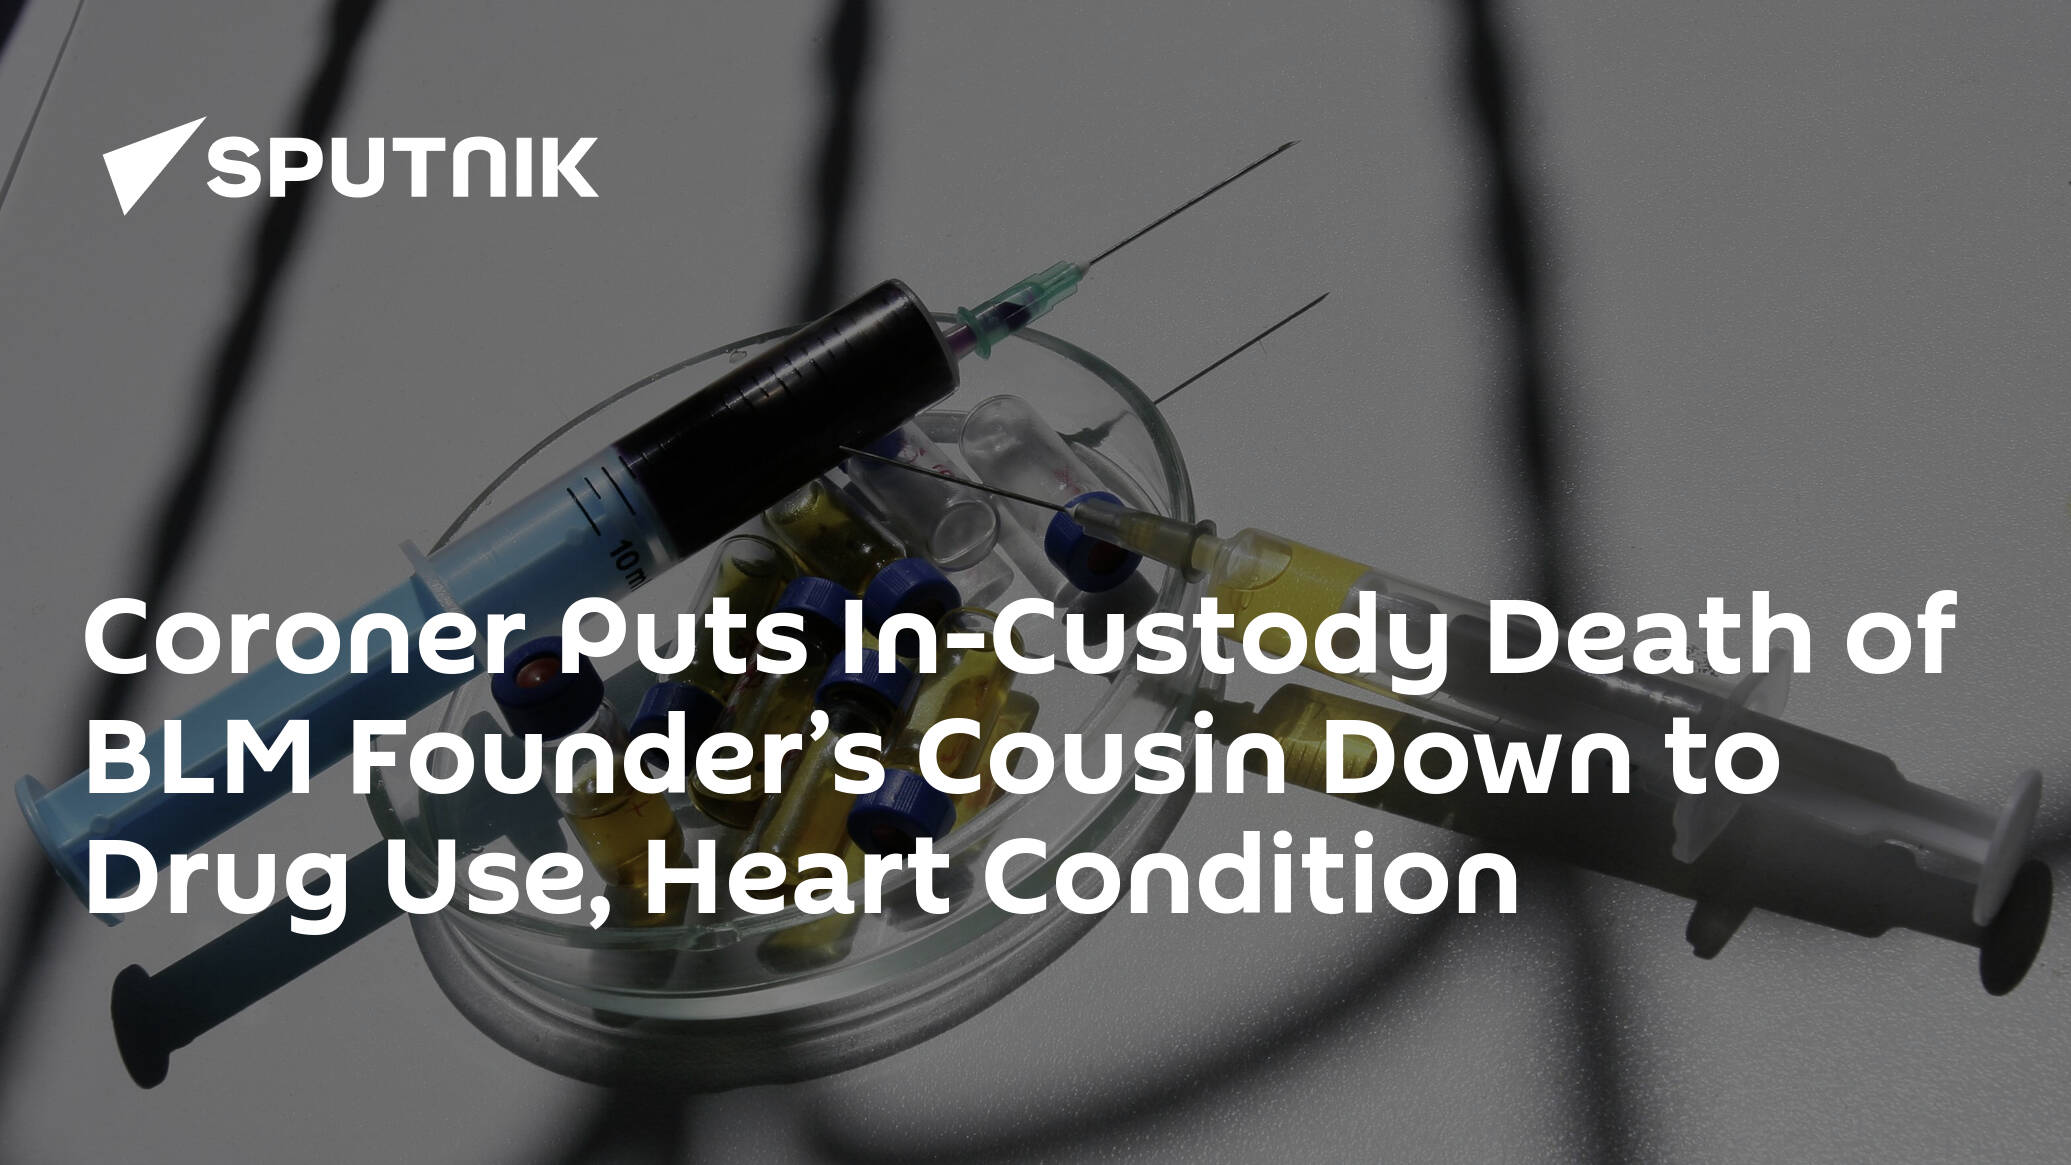 Coroner Puts In-Custody Death of BLM Founder’s Cousin Down to Drug Use, Heart Condition